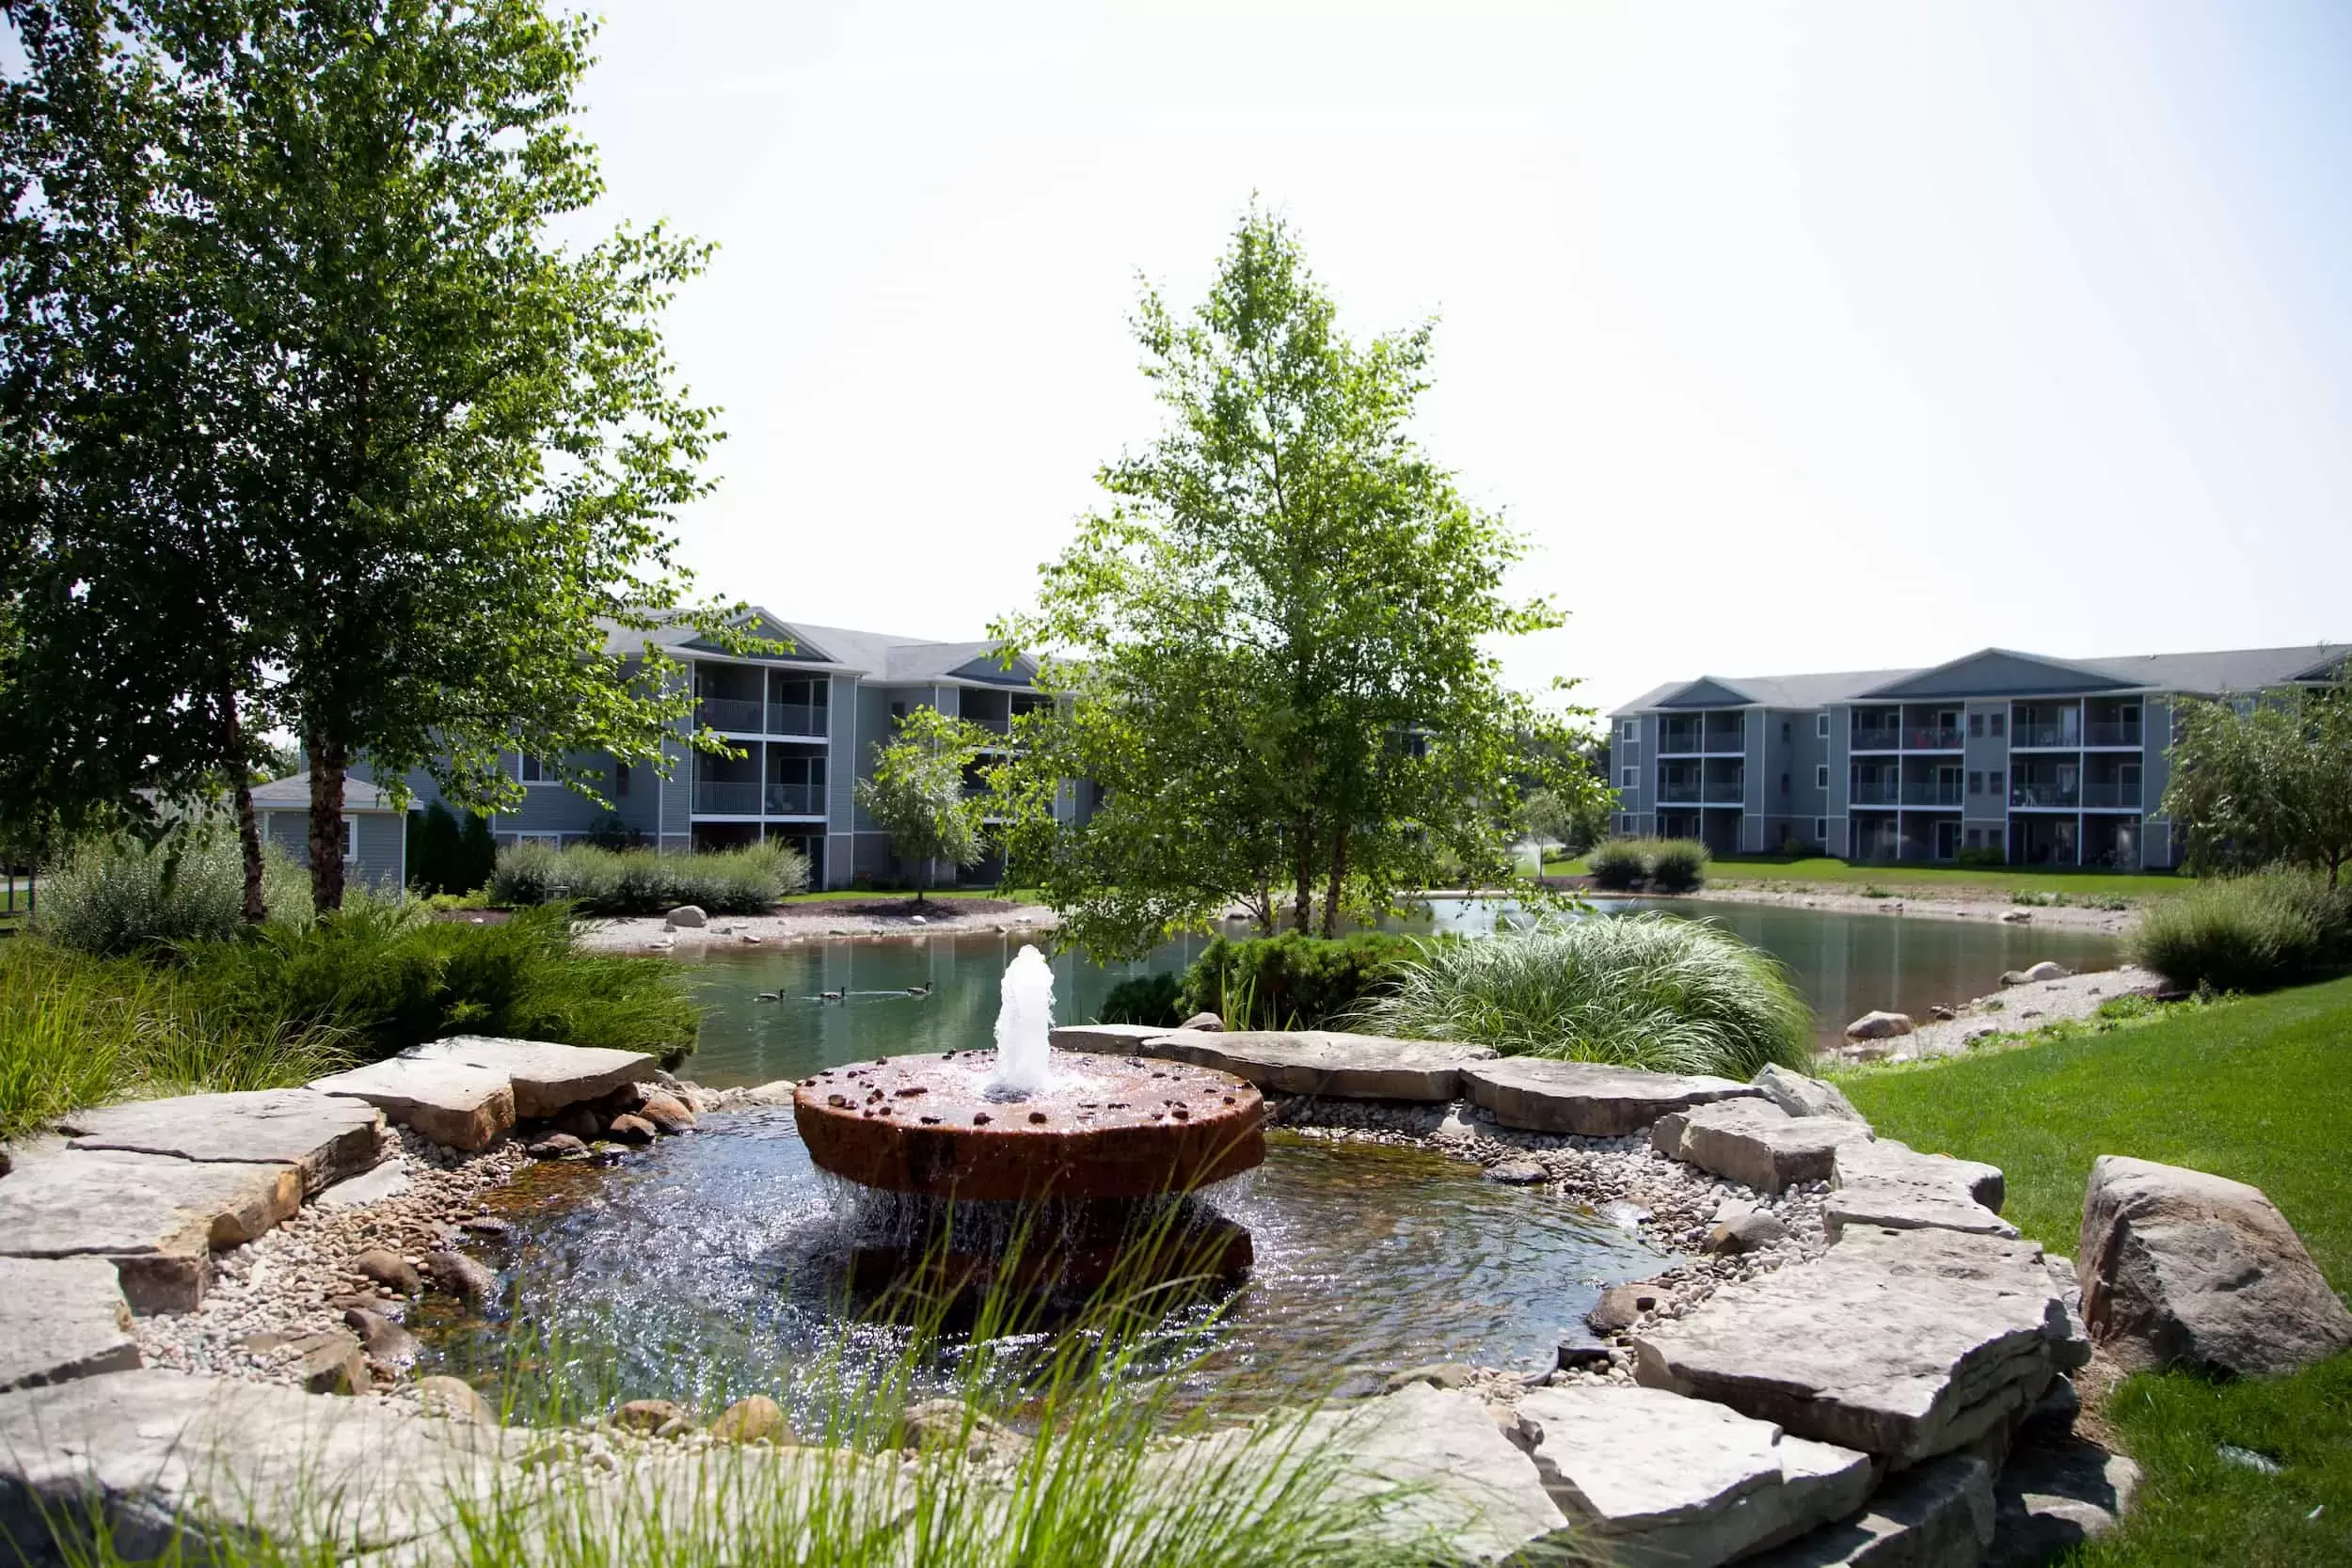 A fountain circled by rocks flows into the pond in front of the apartment buildings.